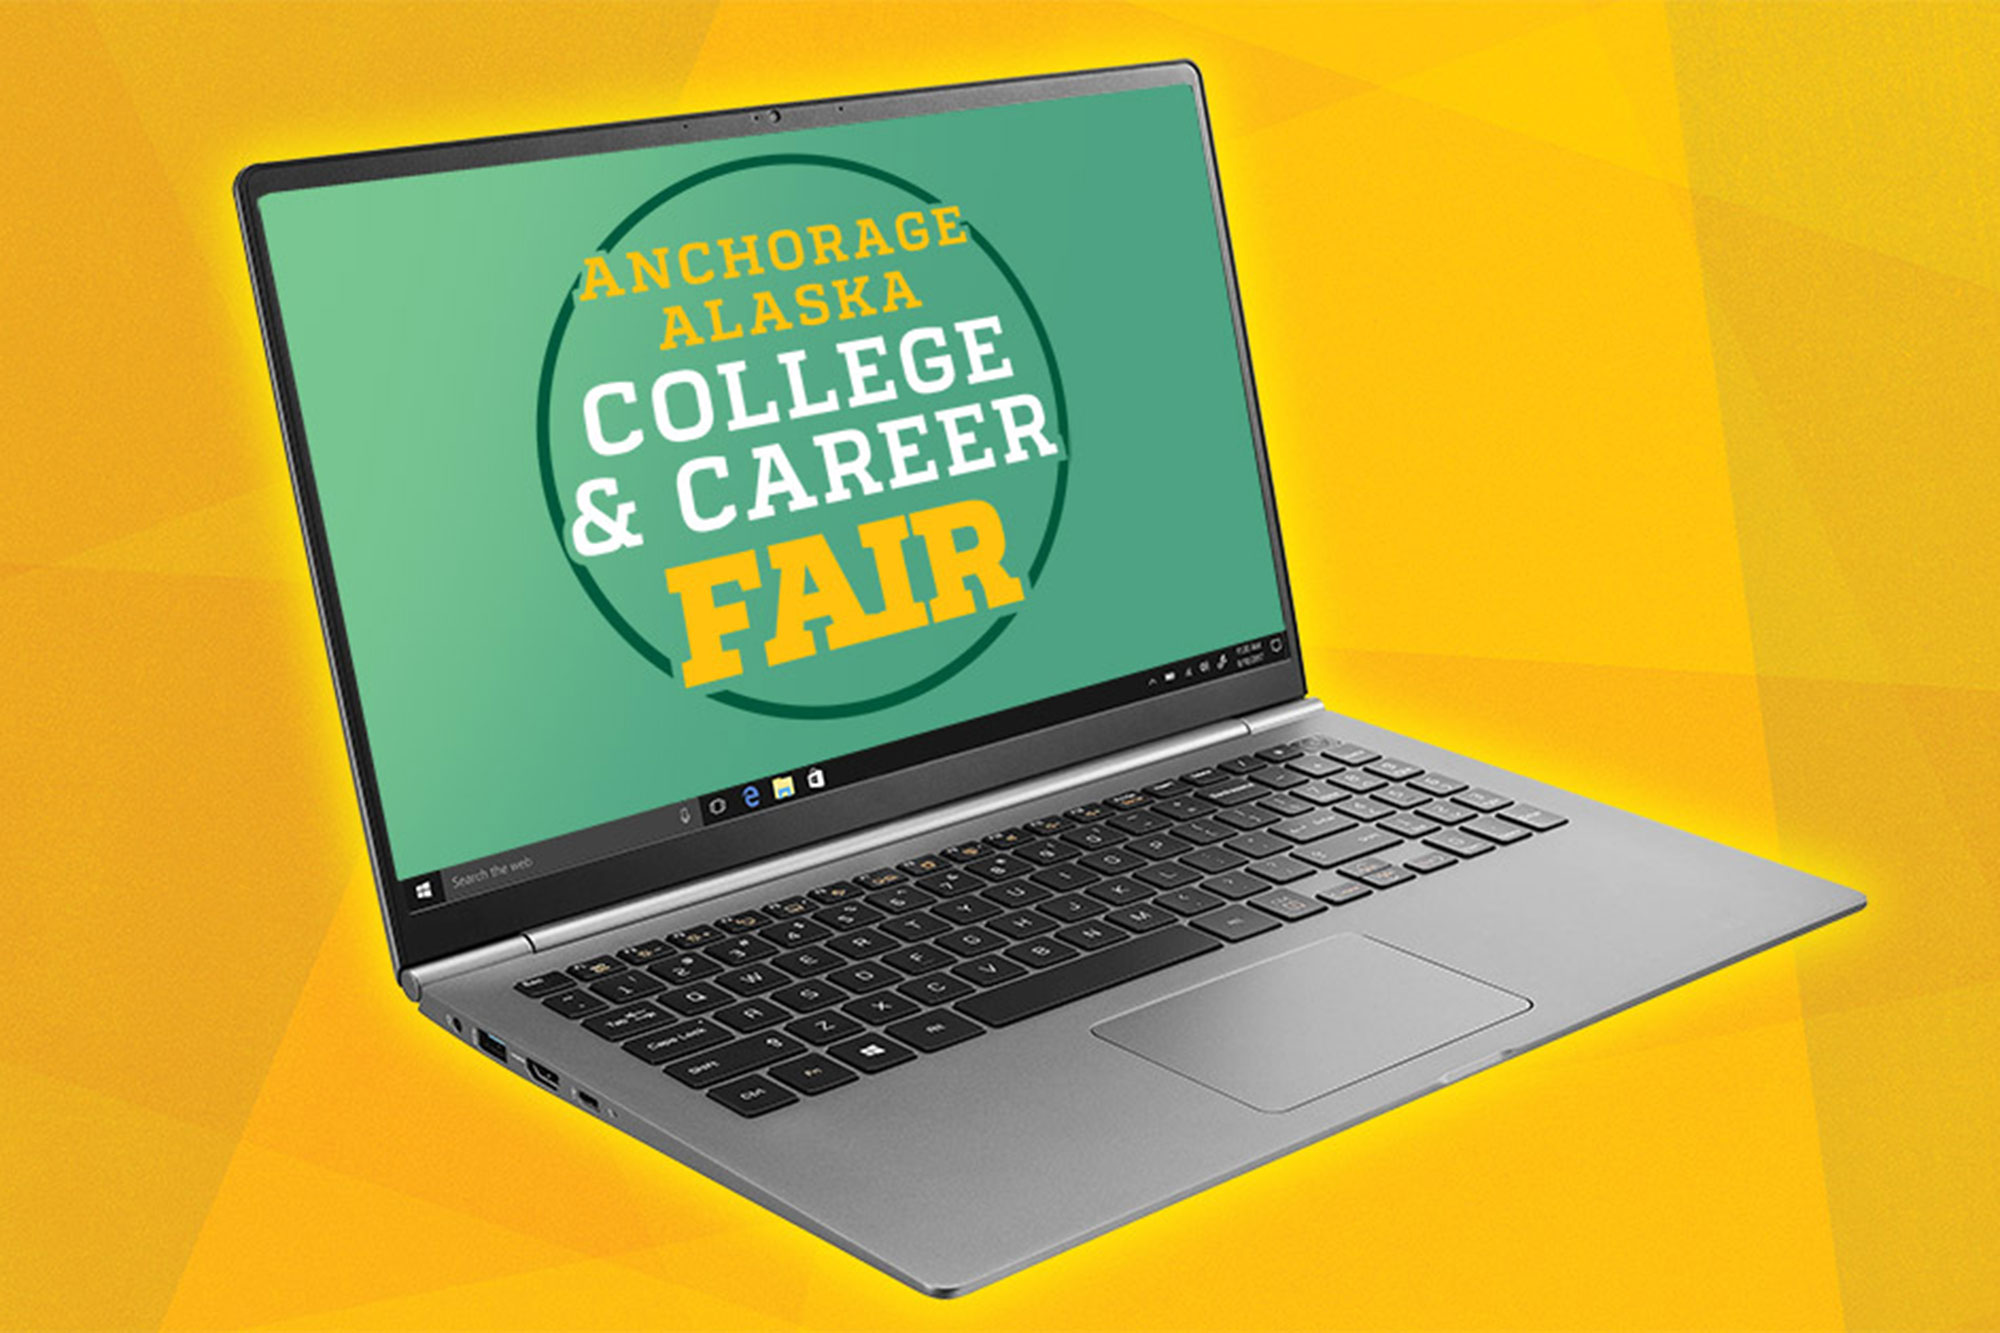 College and Career Fair